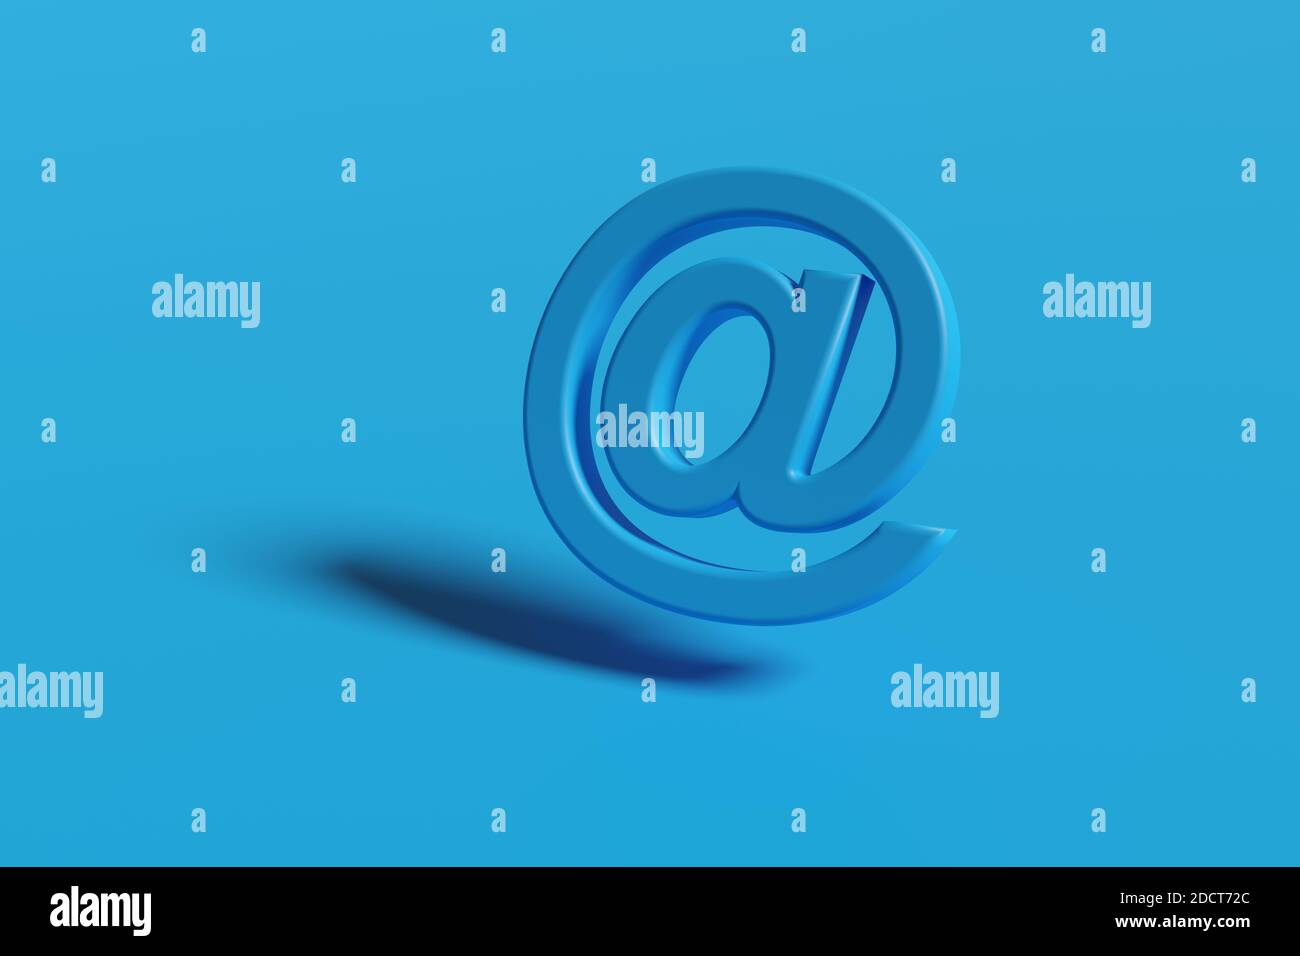 At sign in three dimensions isolated on a blue background. 3d illustration. Stock Photo